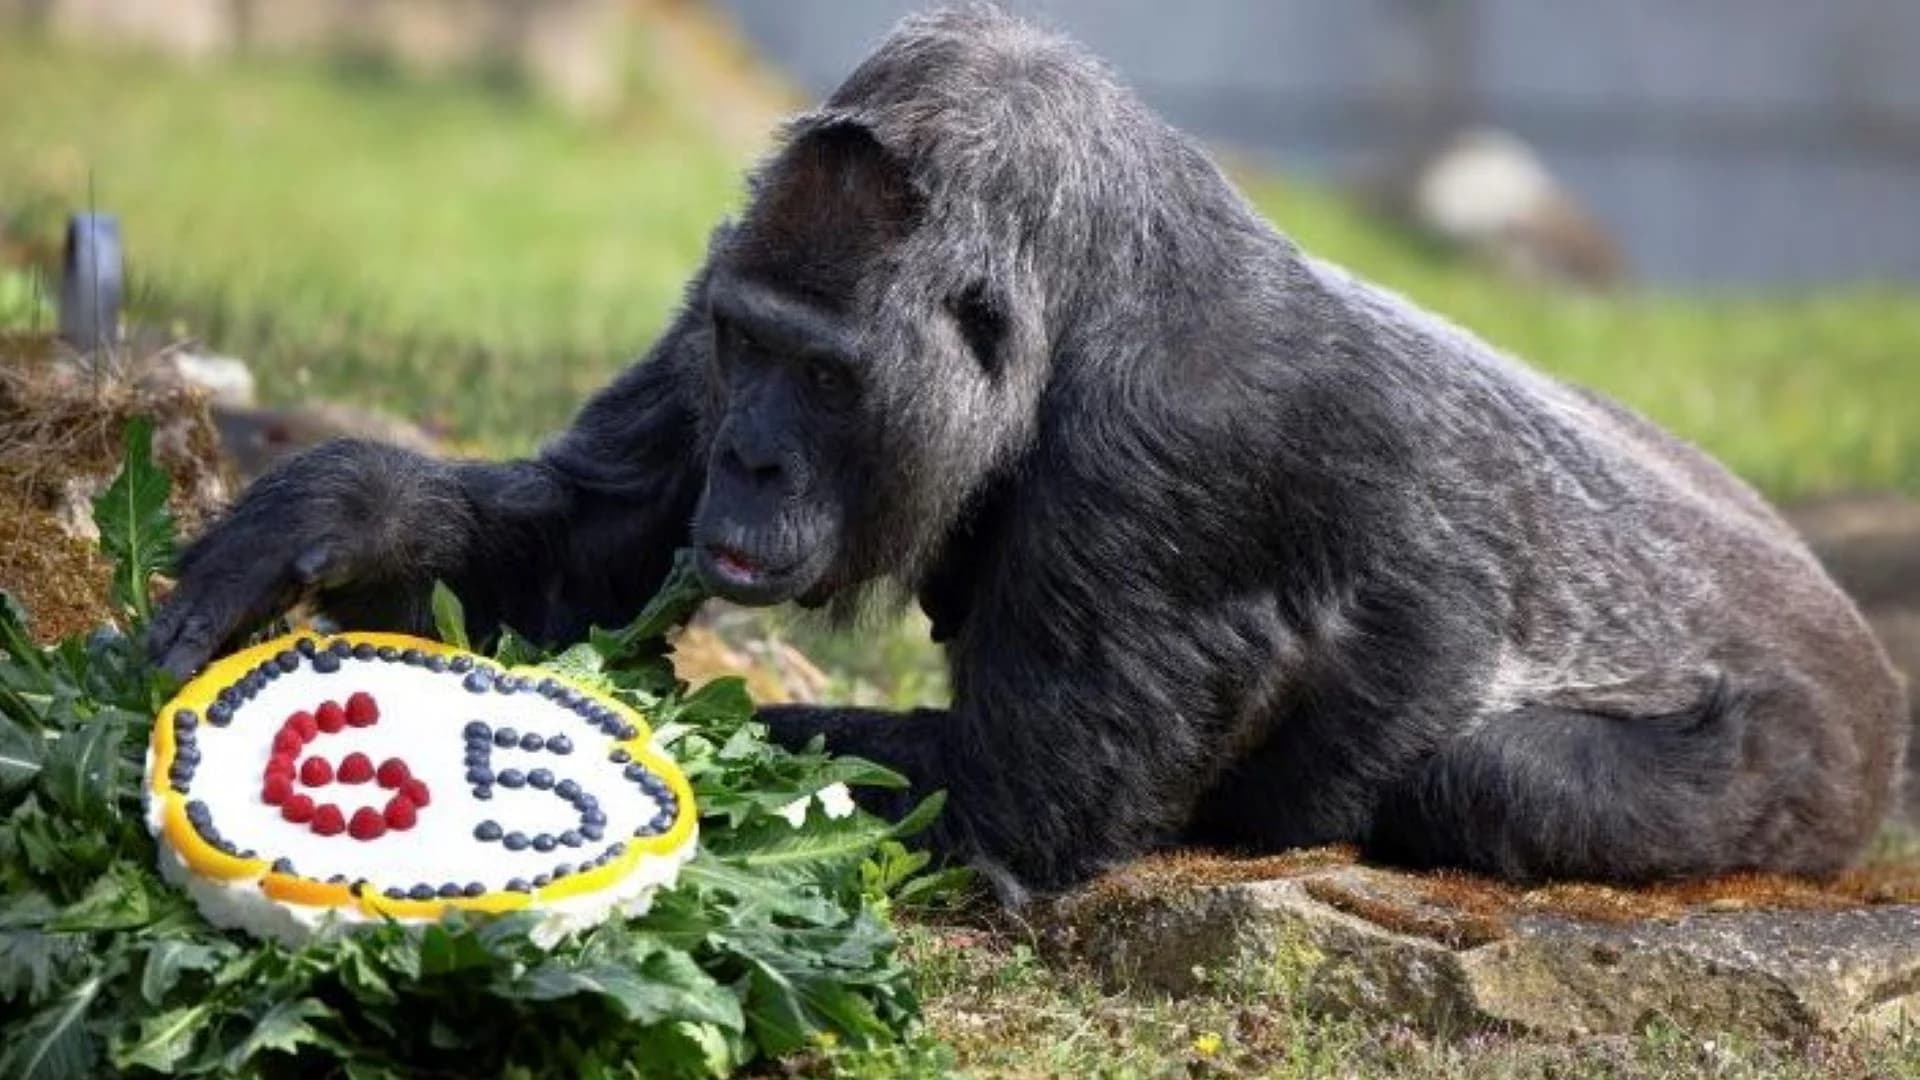 What’s Hot: Oldest known gorilla in the world turns 65